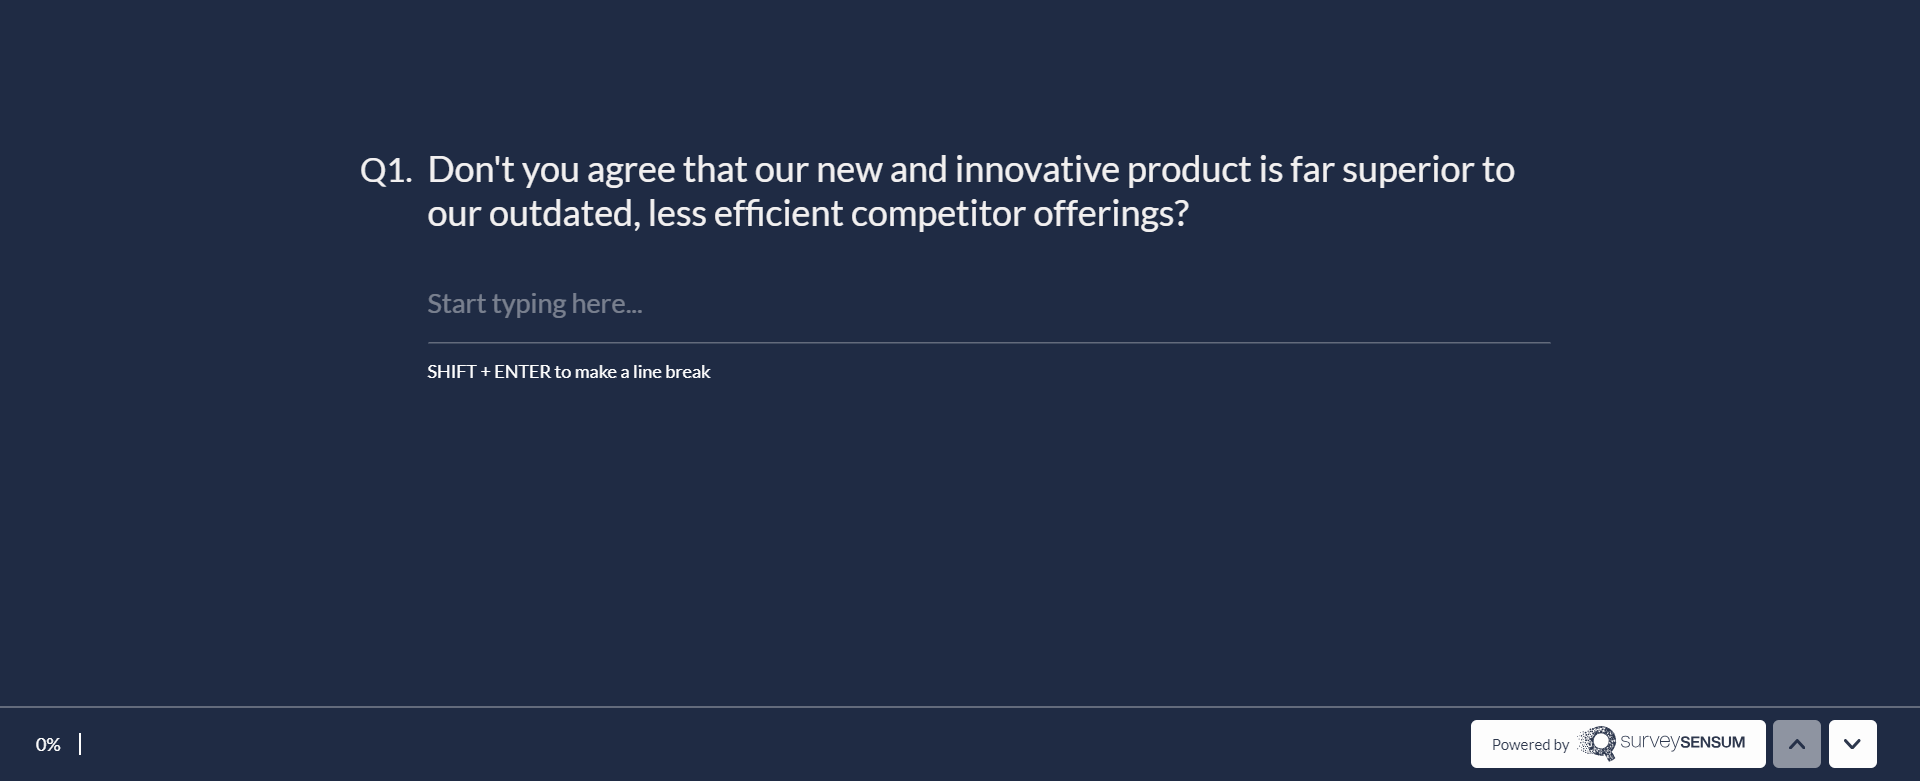 The image shows an example of a biased survey question where the customer is being asked - Don't you agree that our new and innovative product is far superior to our outdated, less efficient competitor offerings?